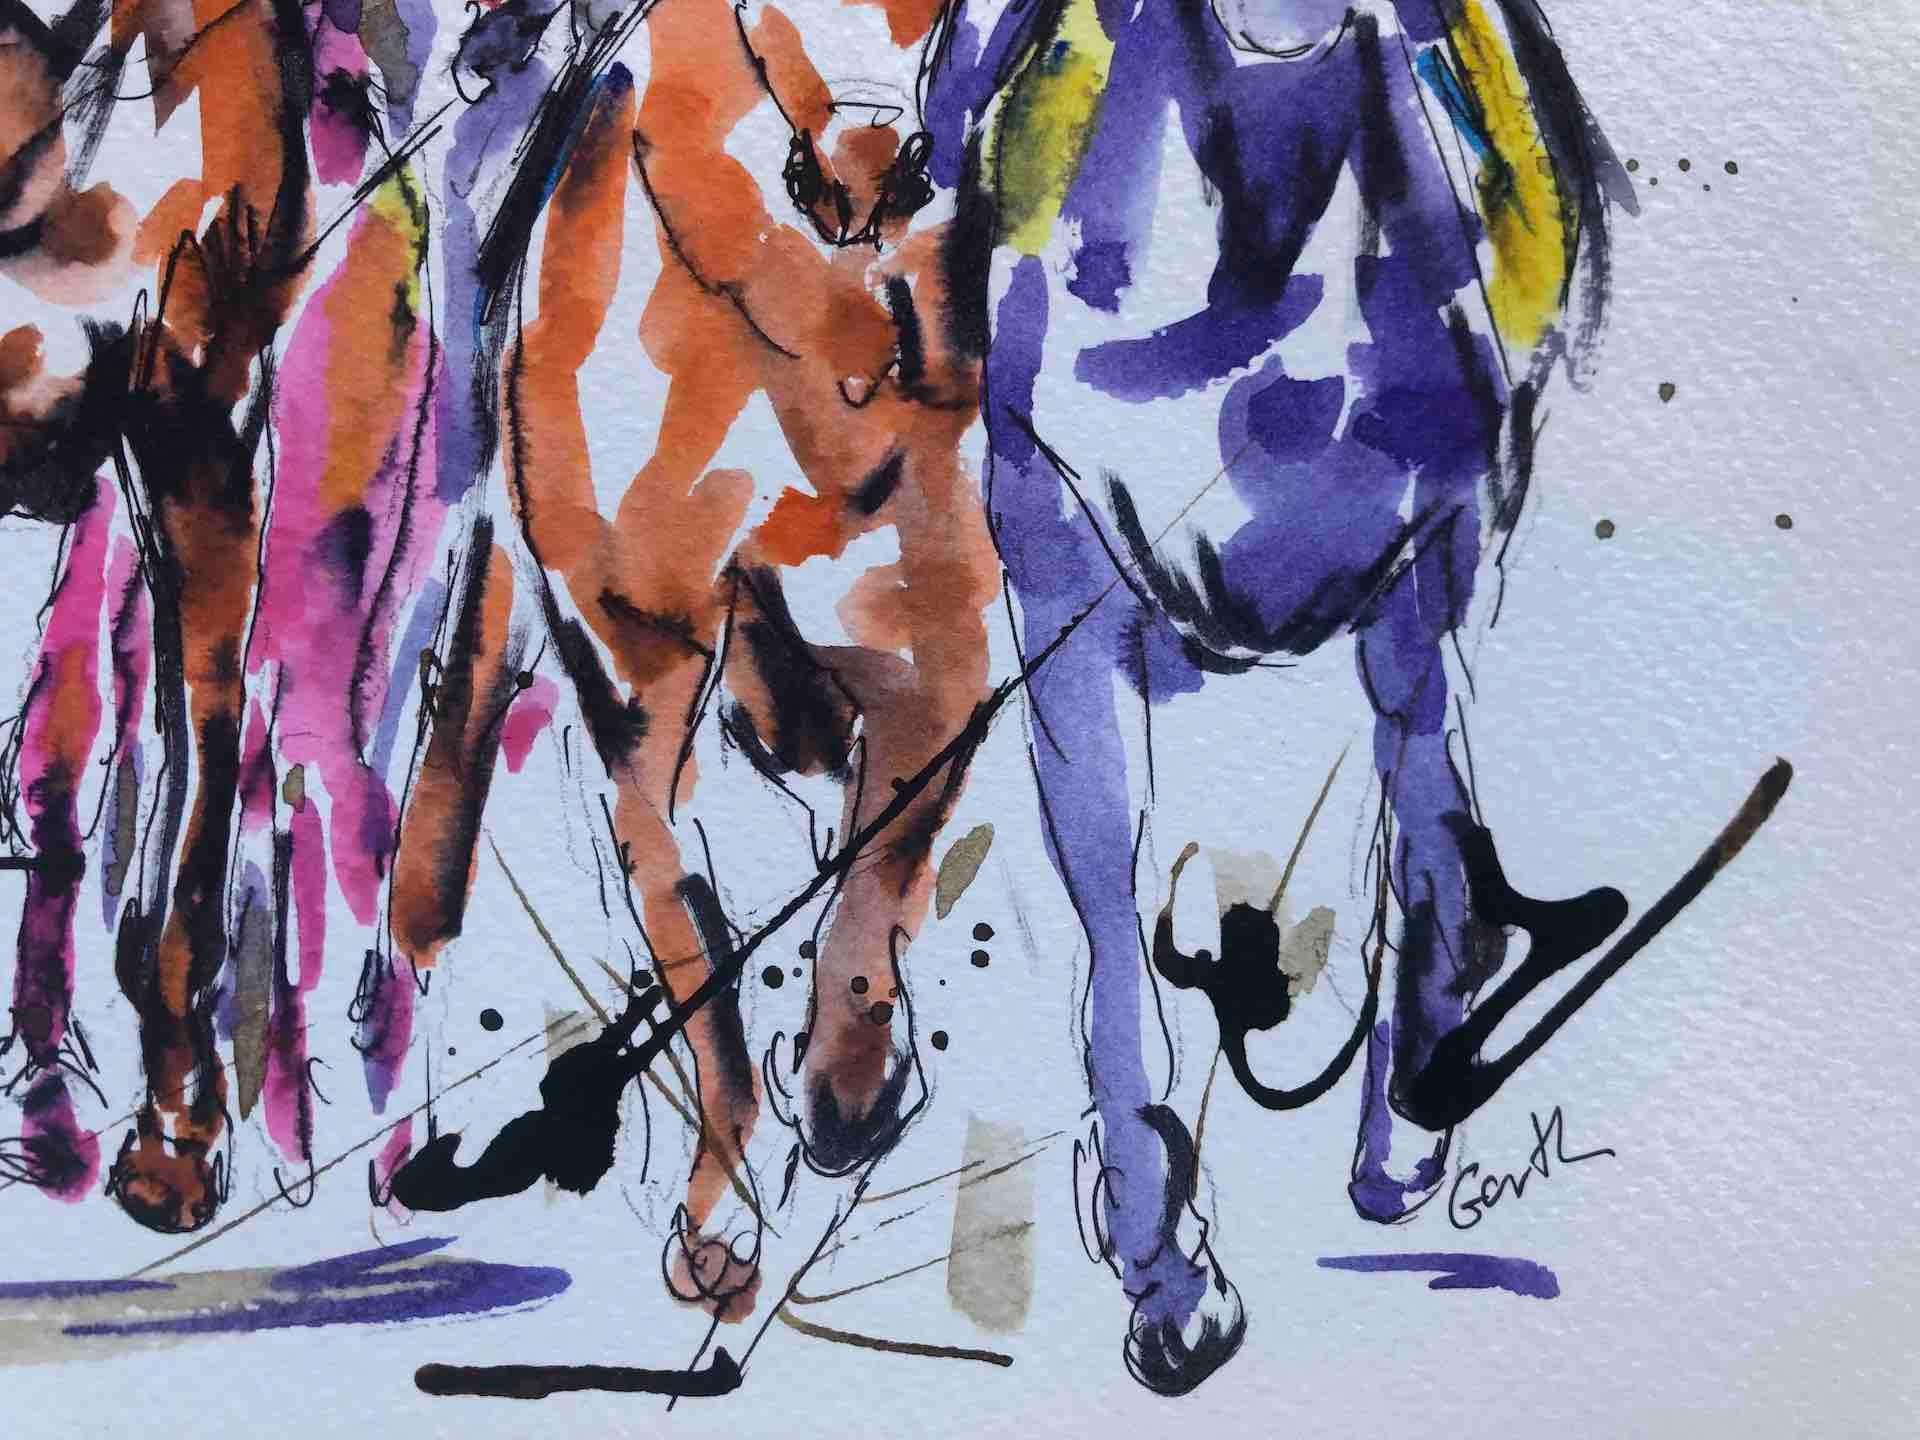 Sprinting Ahead Garth Bayley Horse racing art, Equine Art, Affordable Bright Art For Sale 2